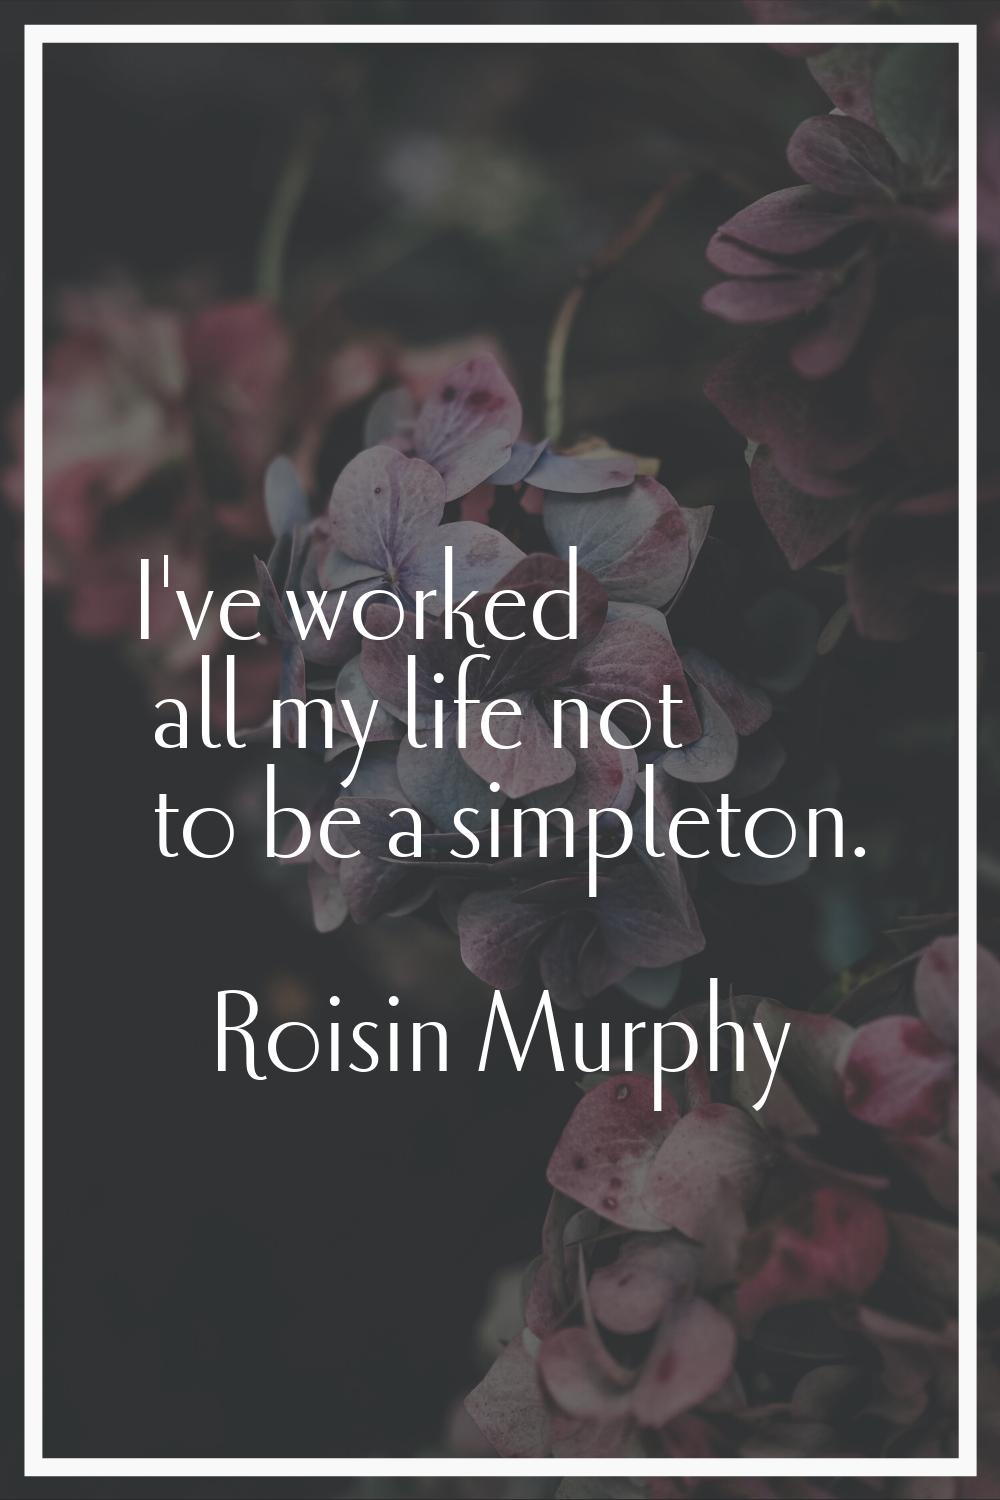 I've worked all my life not to be a simpleton.